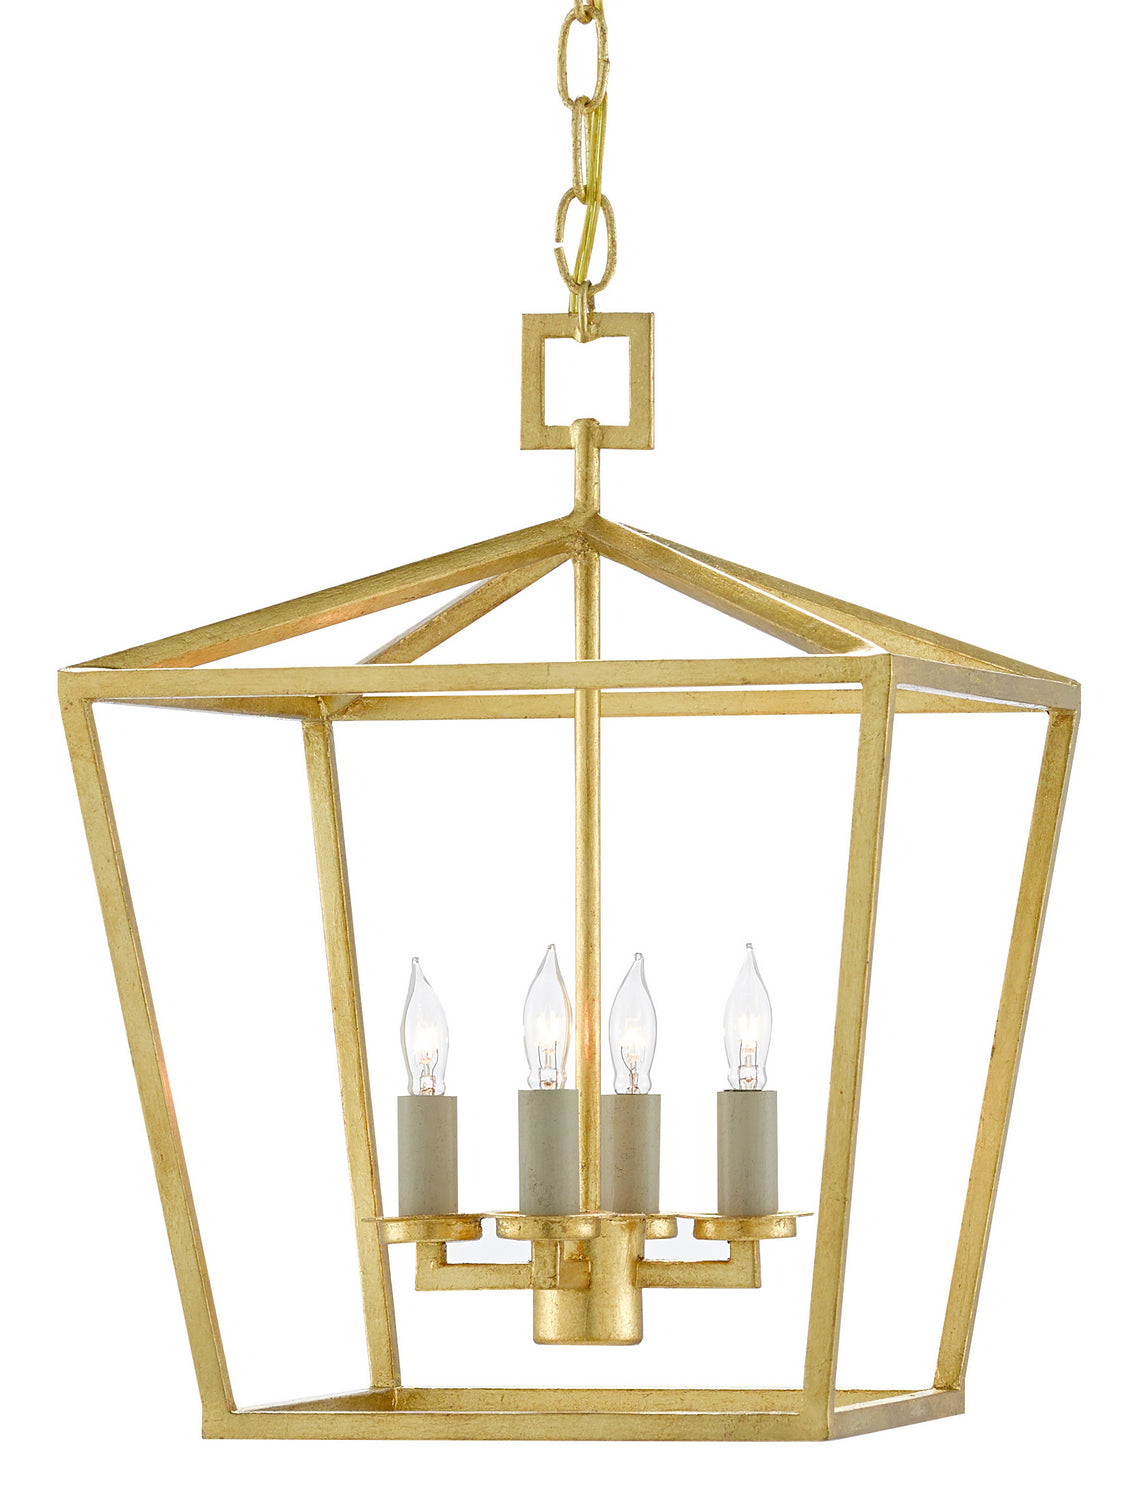 Four Light Lantern from the Denison collection in Contemporary Gold Leaf finish